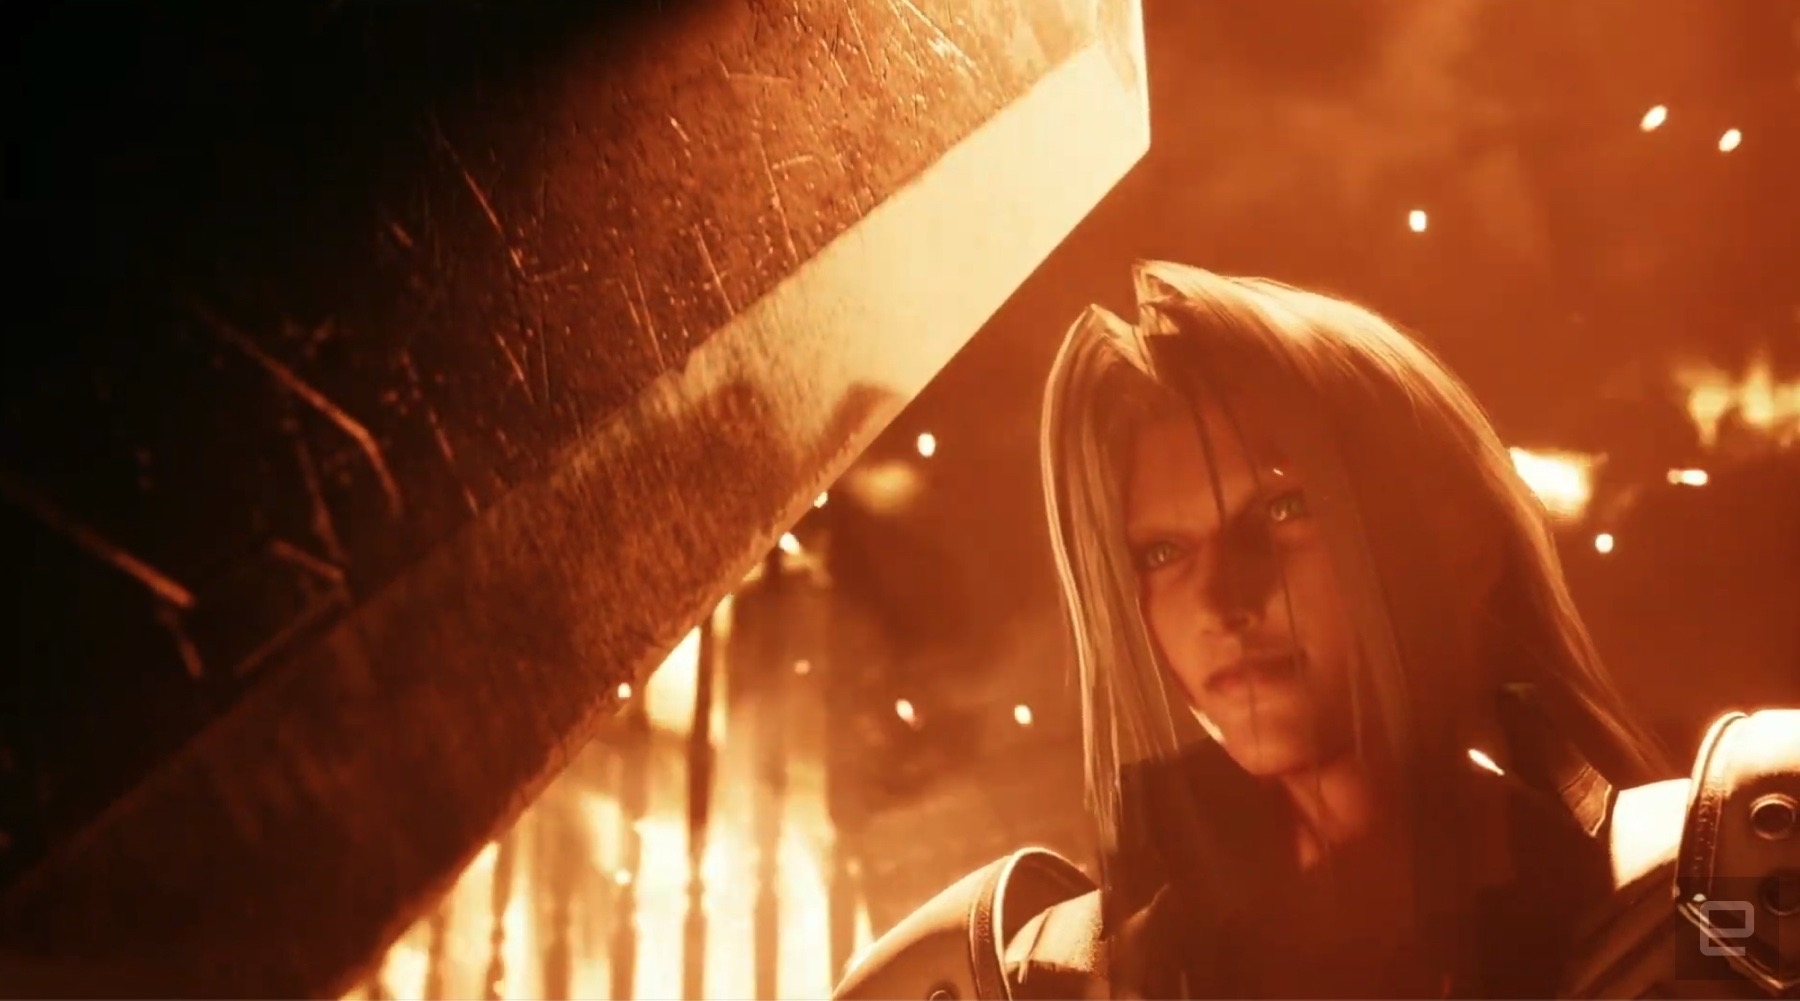 'Final Fantasy VII Remake' will take up two Blu-ray discs | DeviceDaily.com